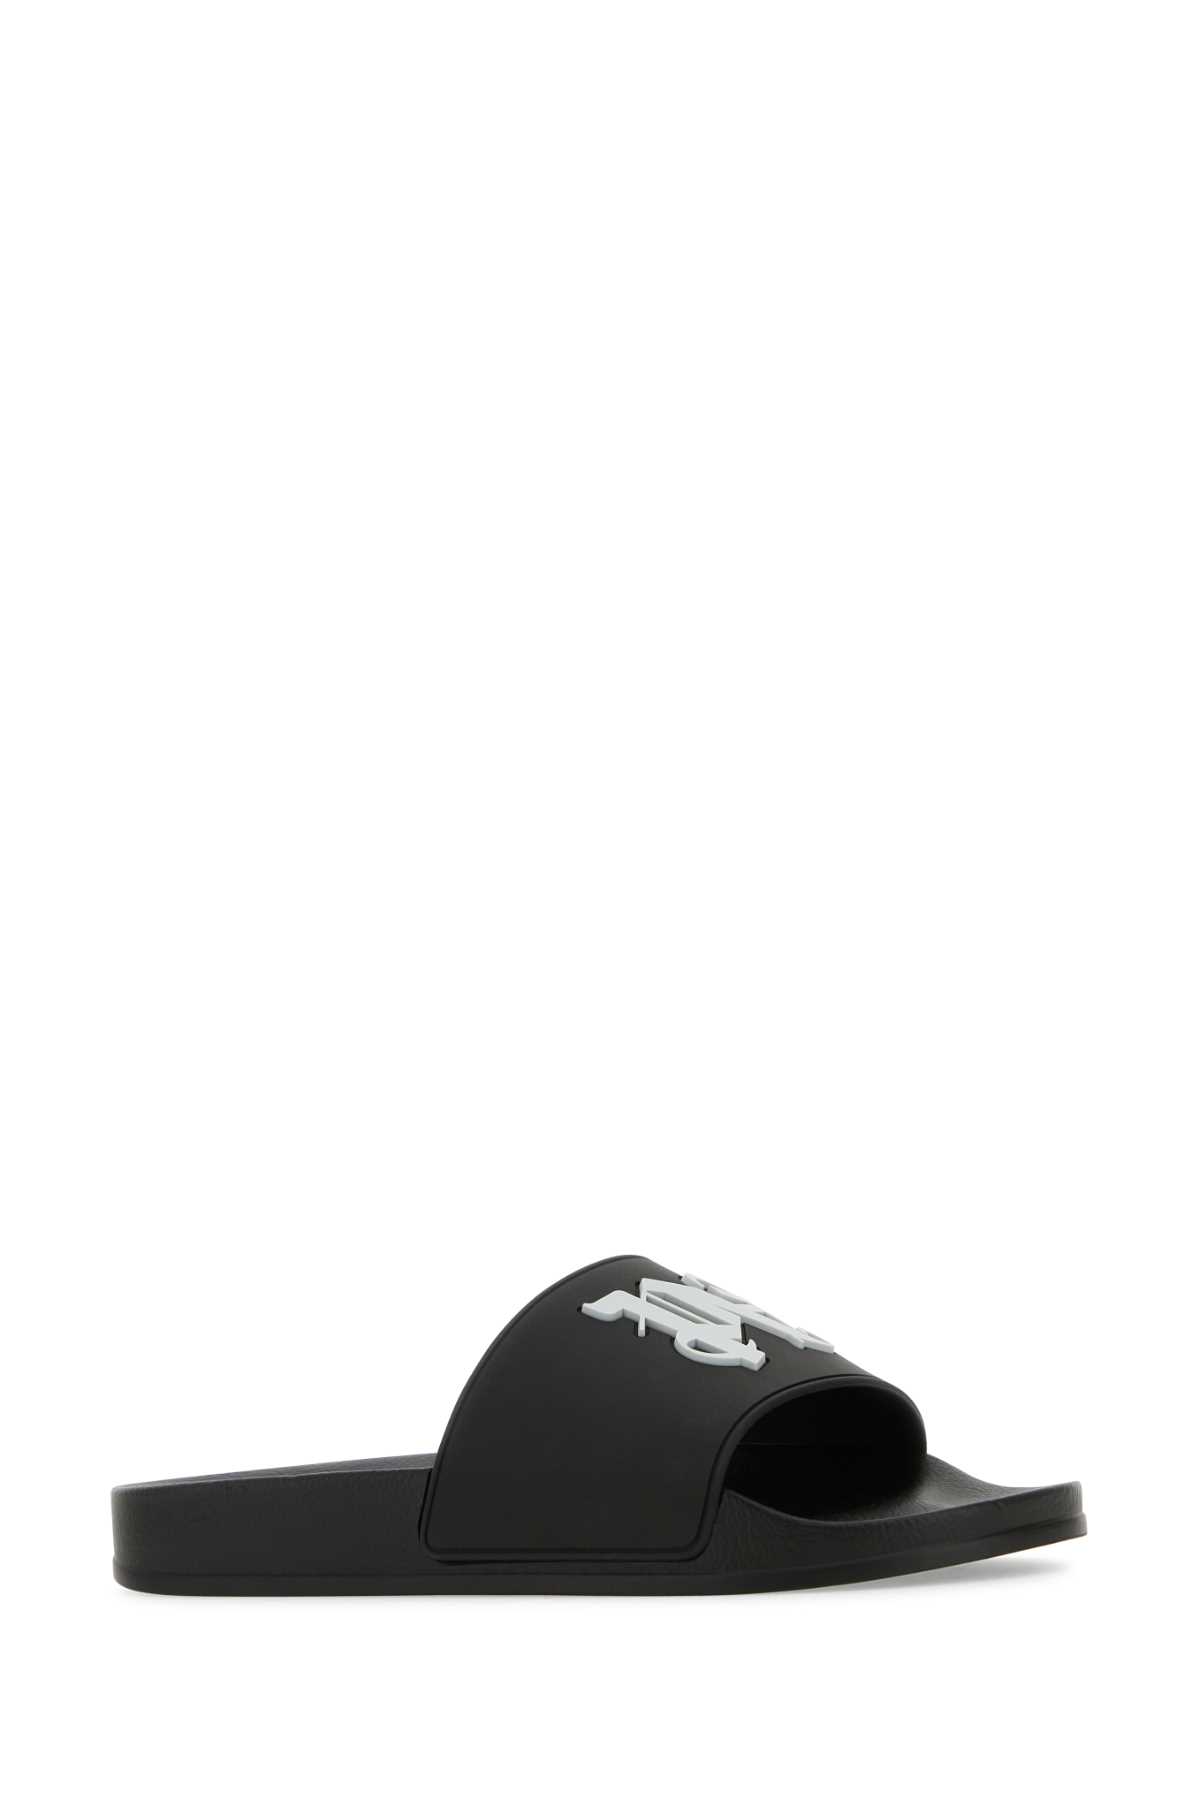 PALM ANGELS BLACK RUBBER SLIPPERS